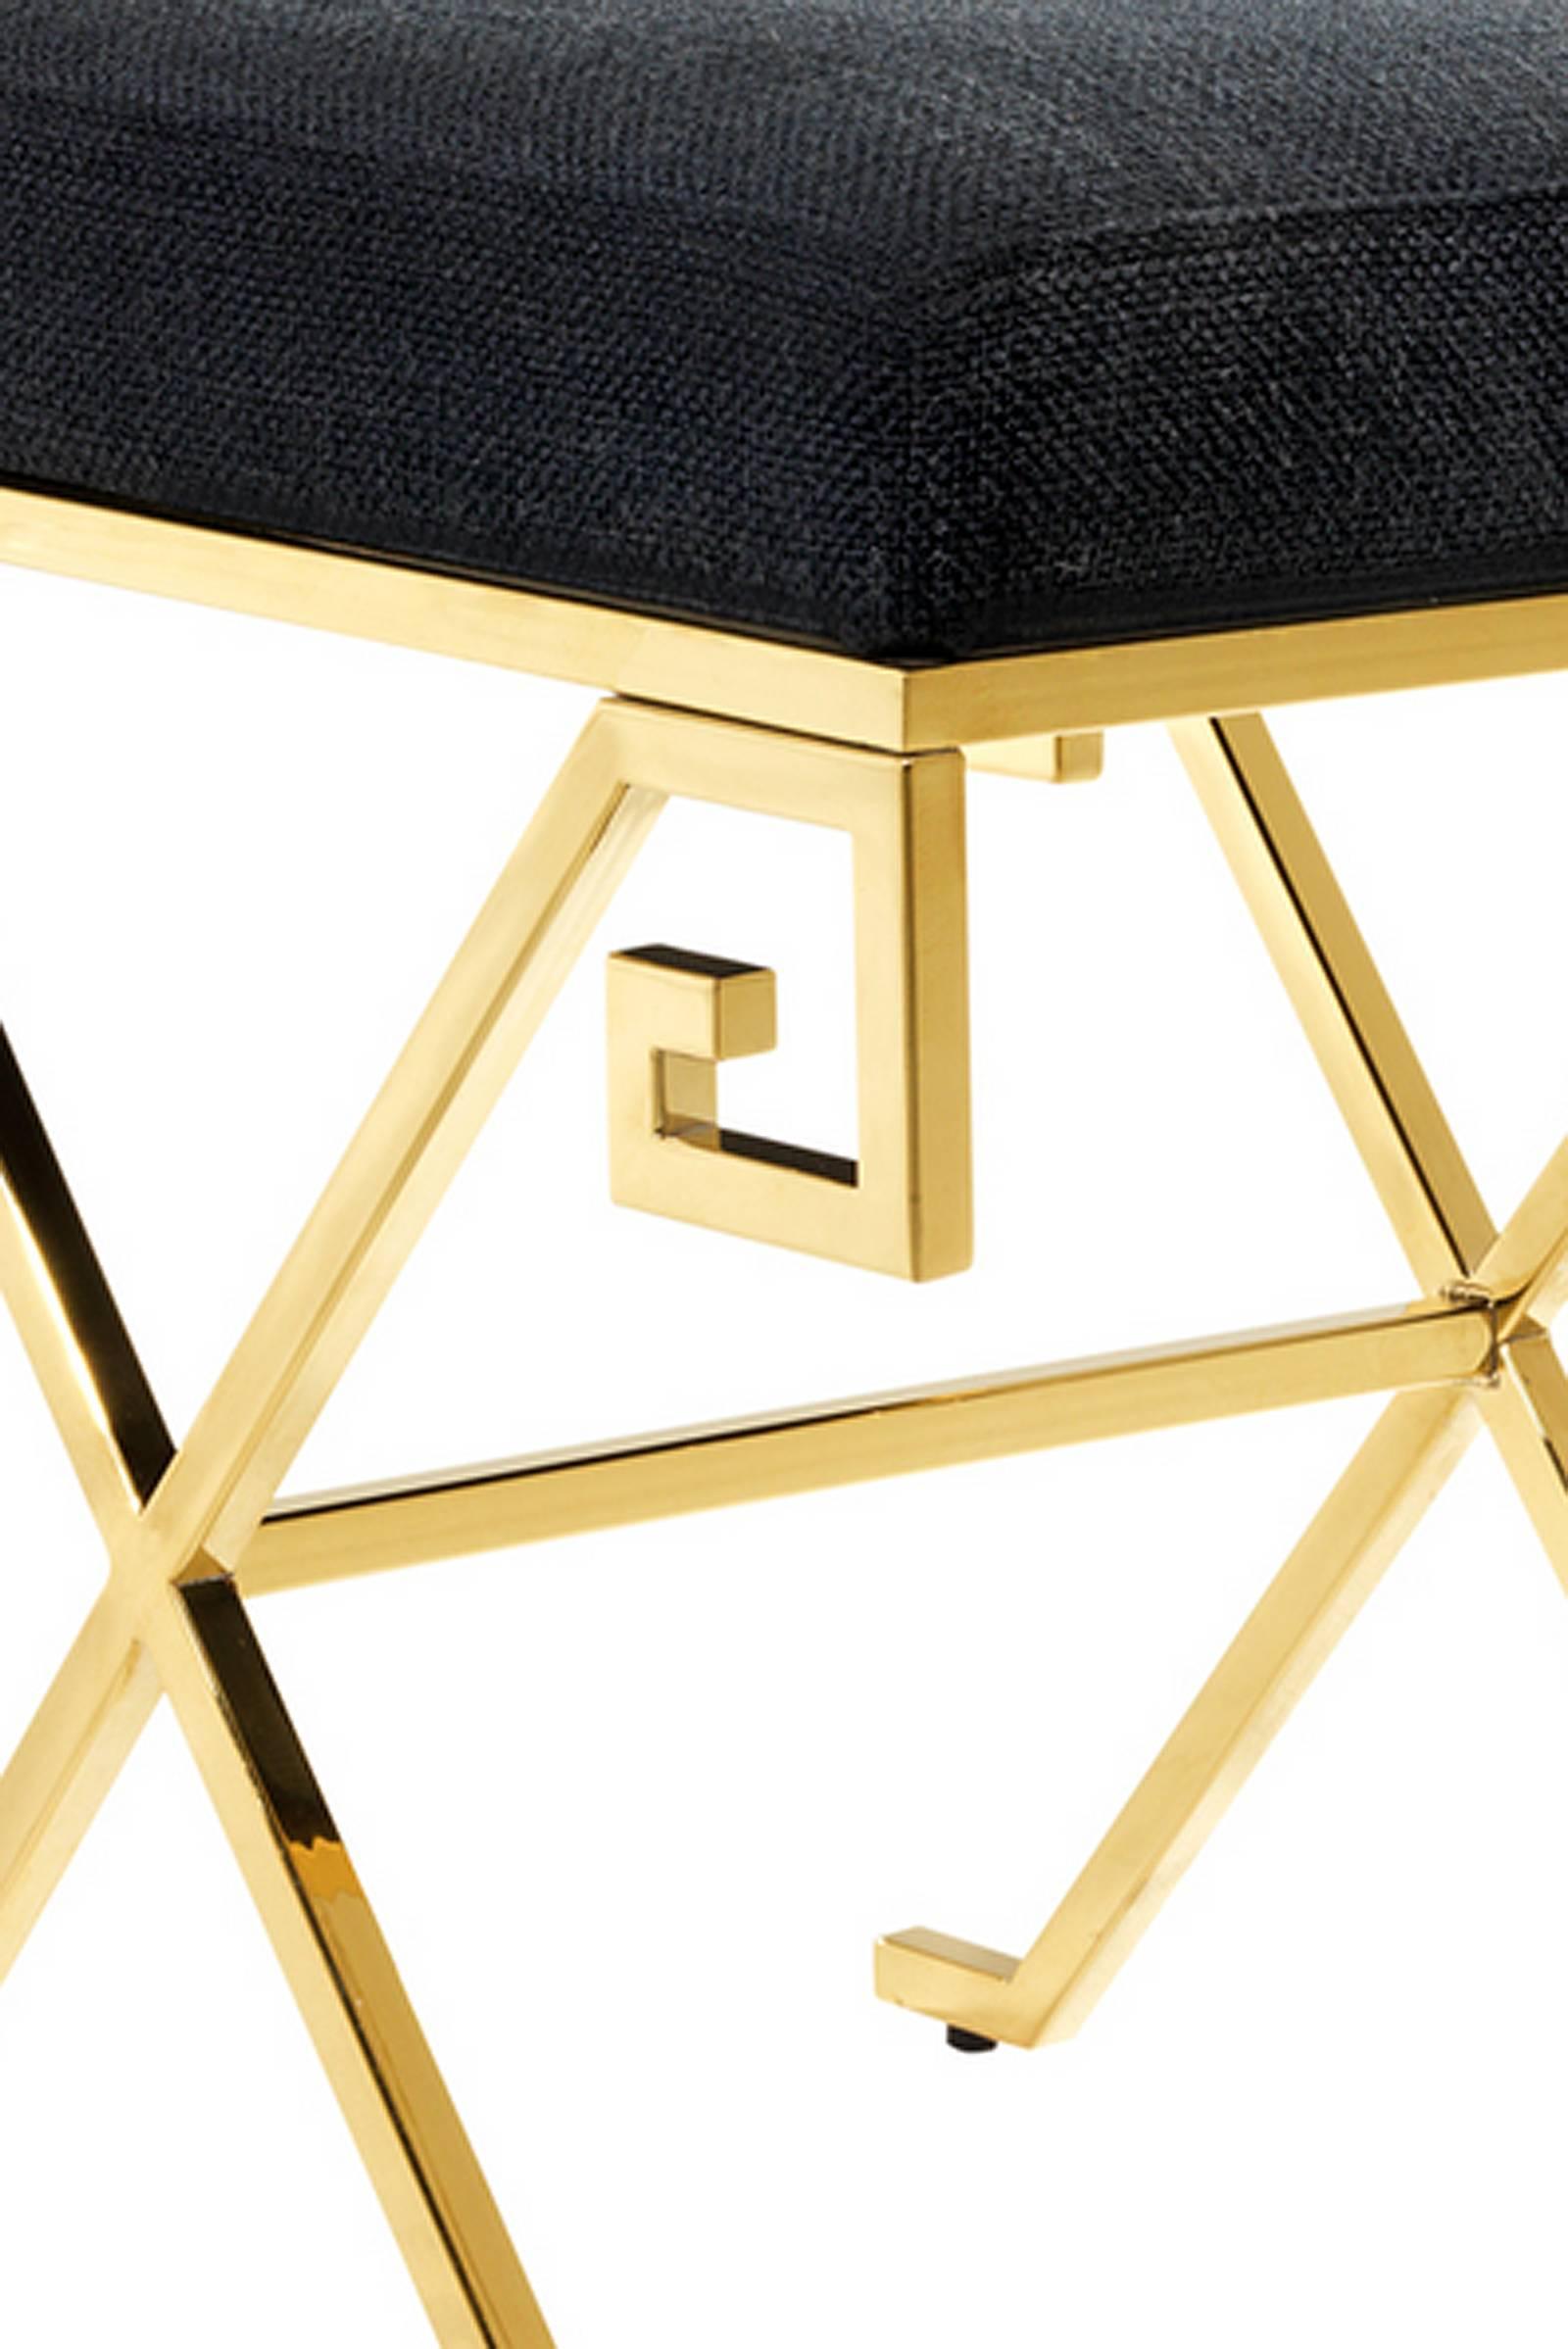 Dutch Square Stool in Gold Finish or Polished Stainless Steel and Panama Fabric, 2016